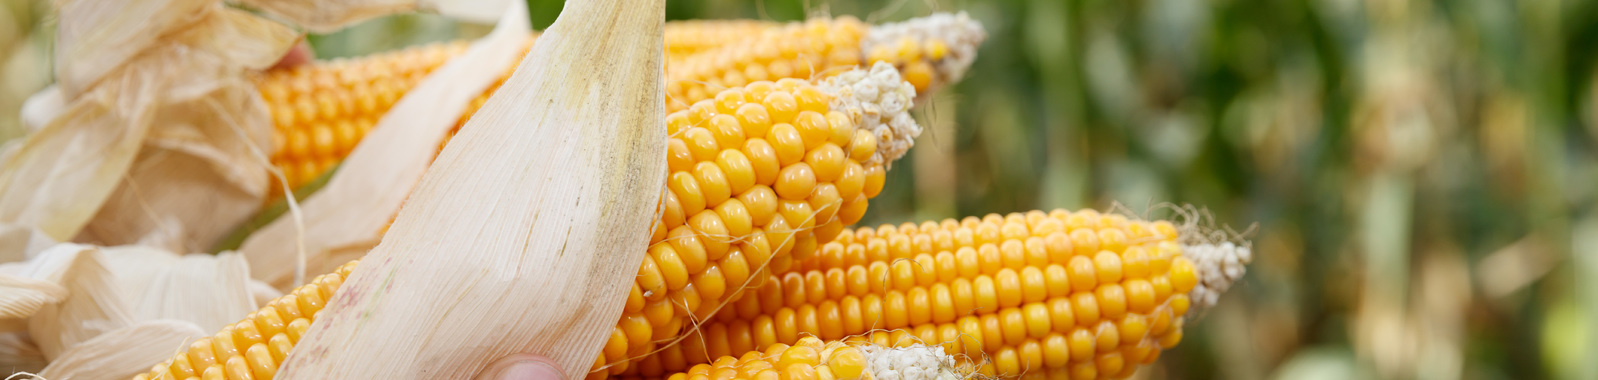 Corn plant growth and crop nutrition